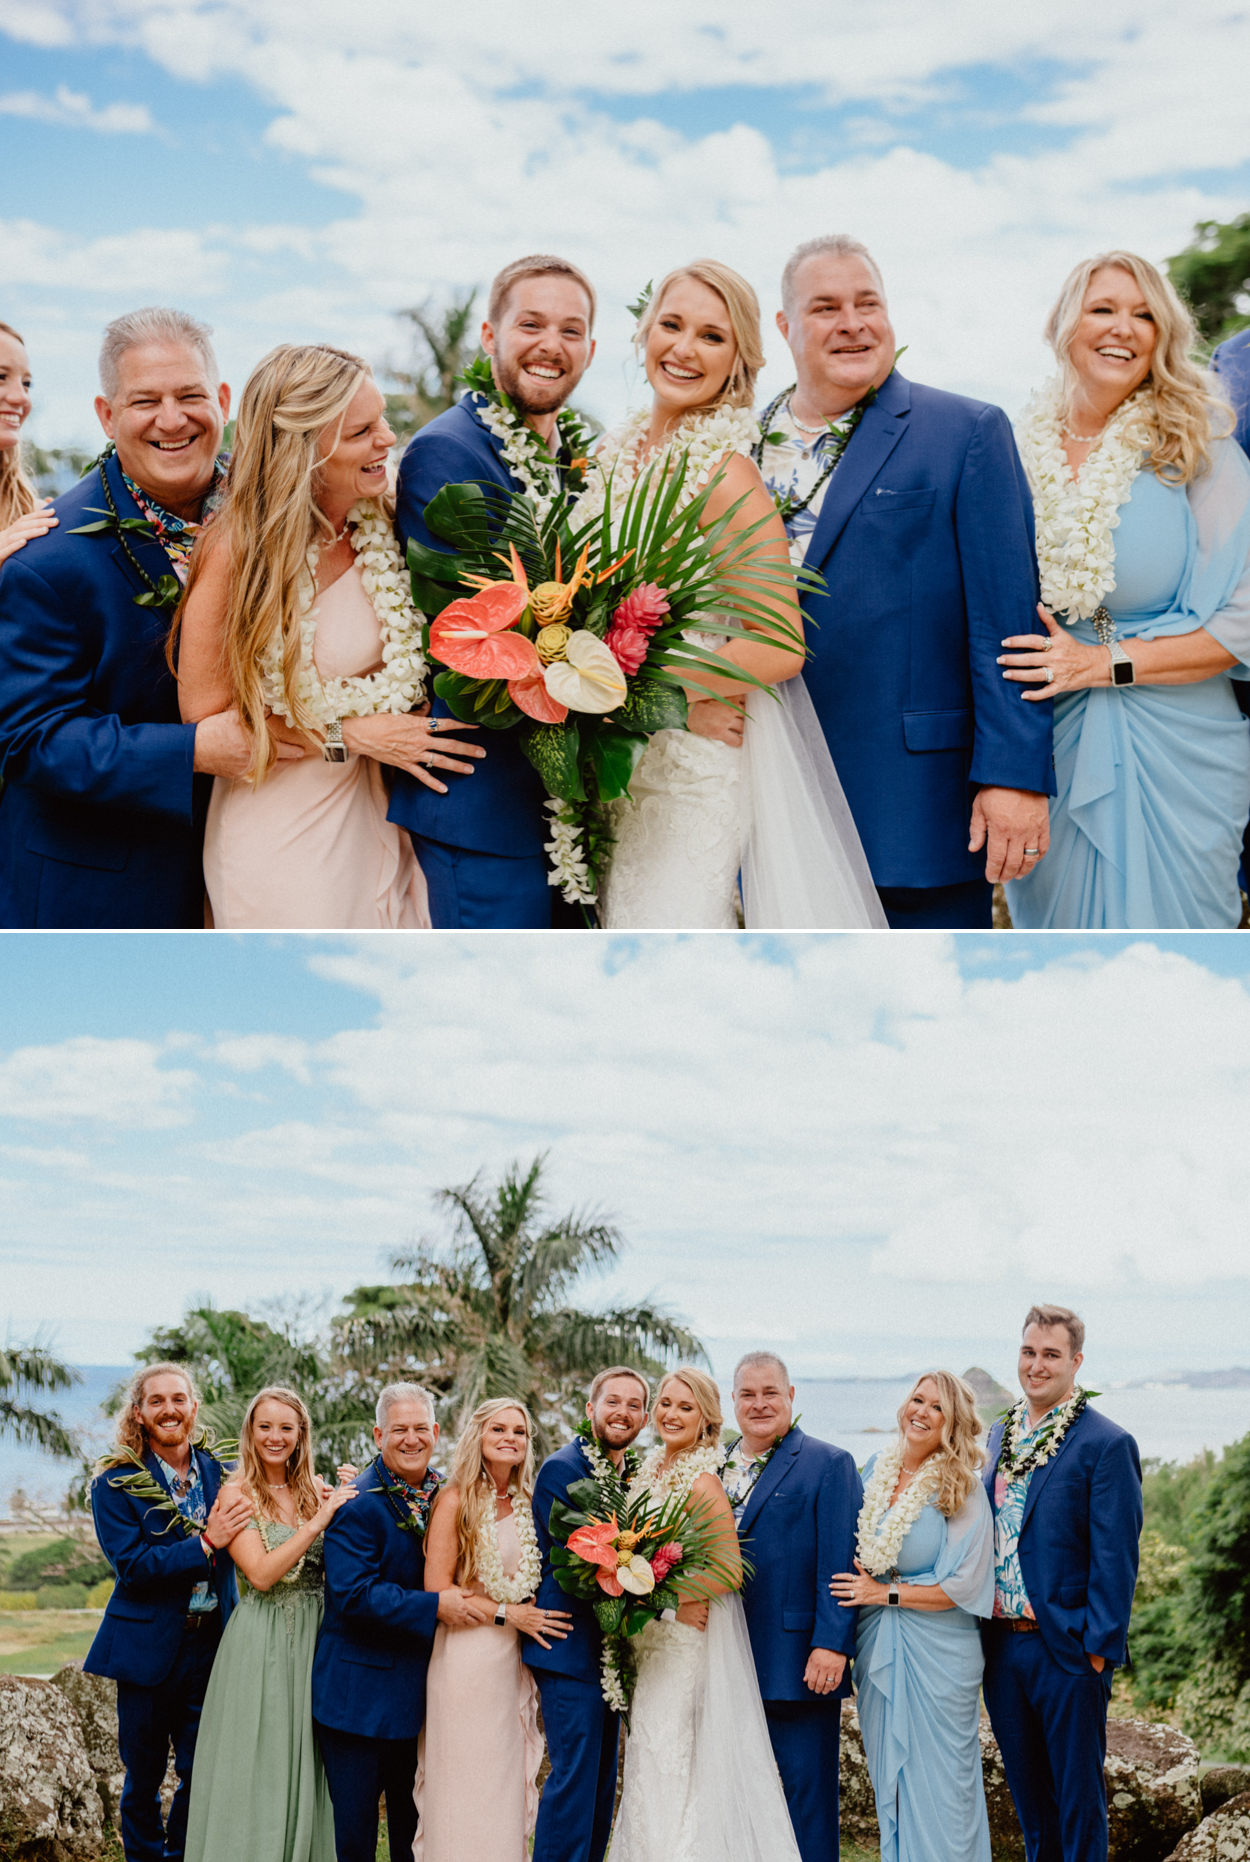 Bride and Groom with their families in Paliku Gardens Venue at Kualoa Ranch wedding with Chinaman's hat background